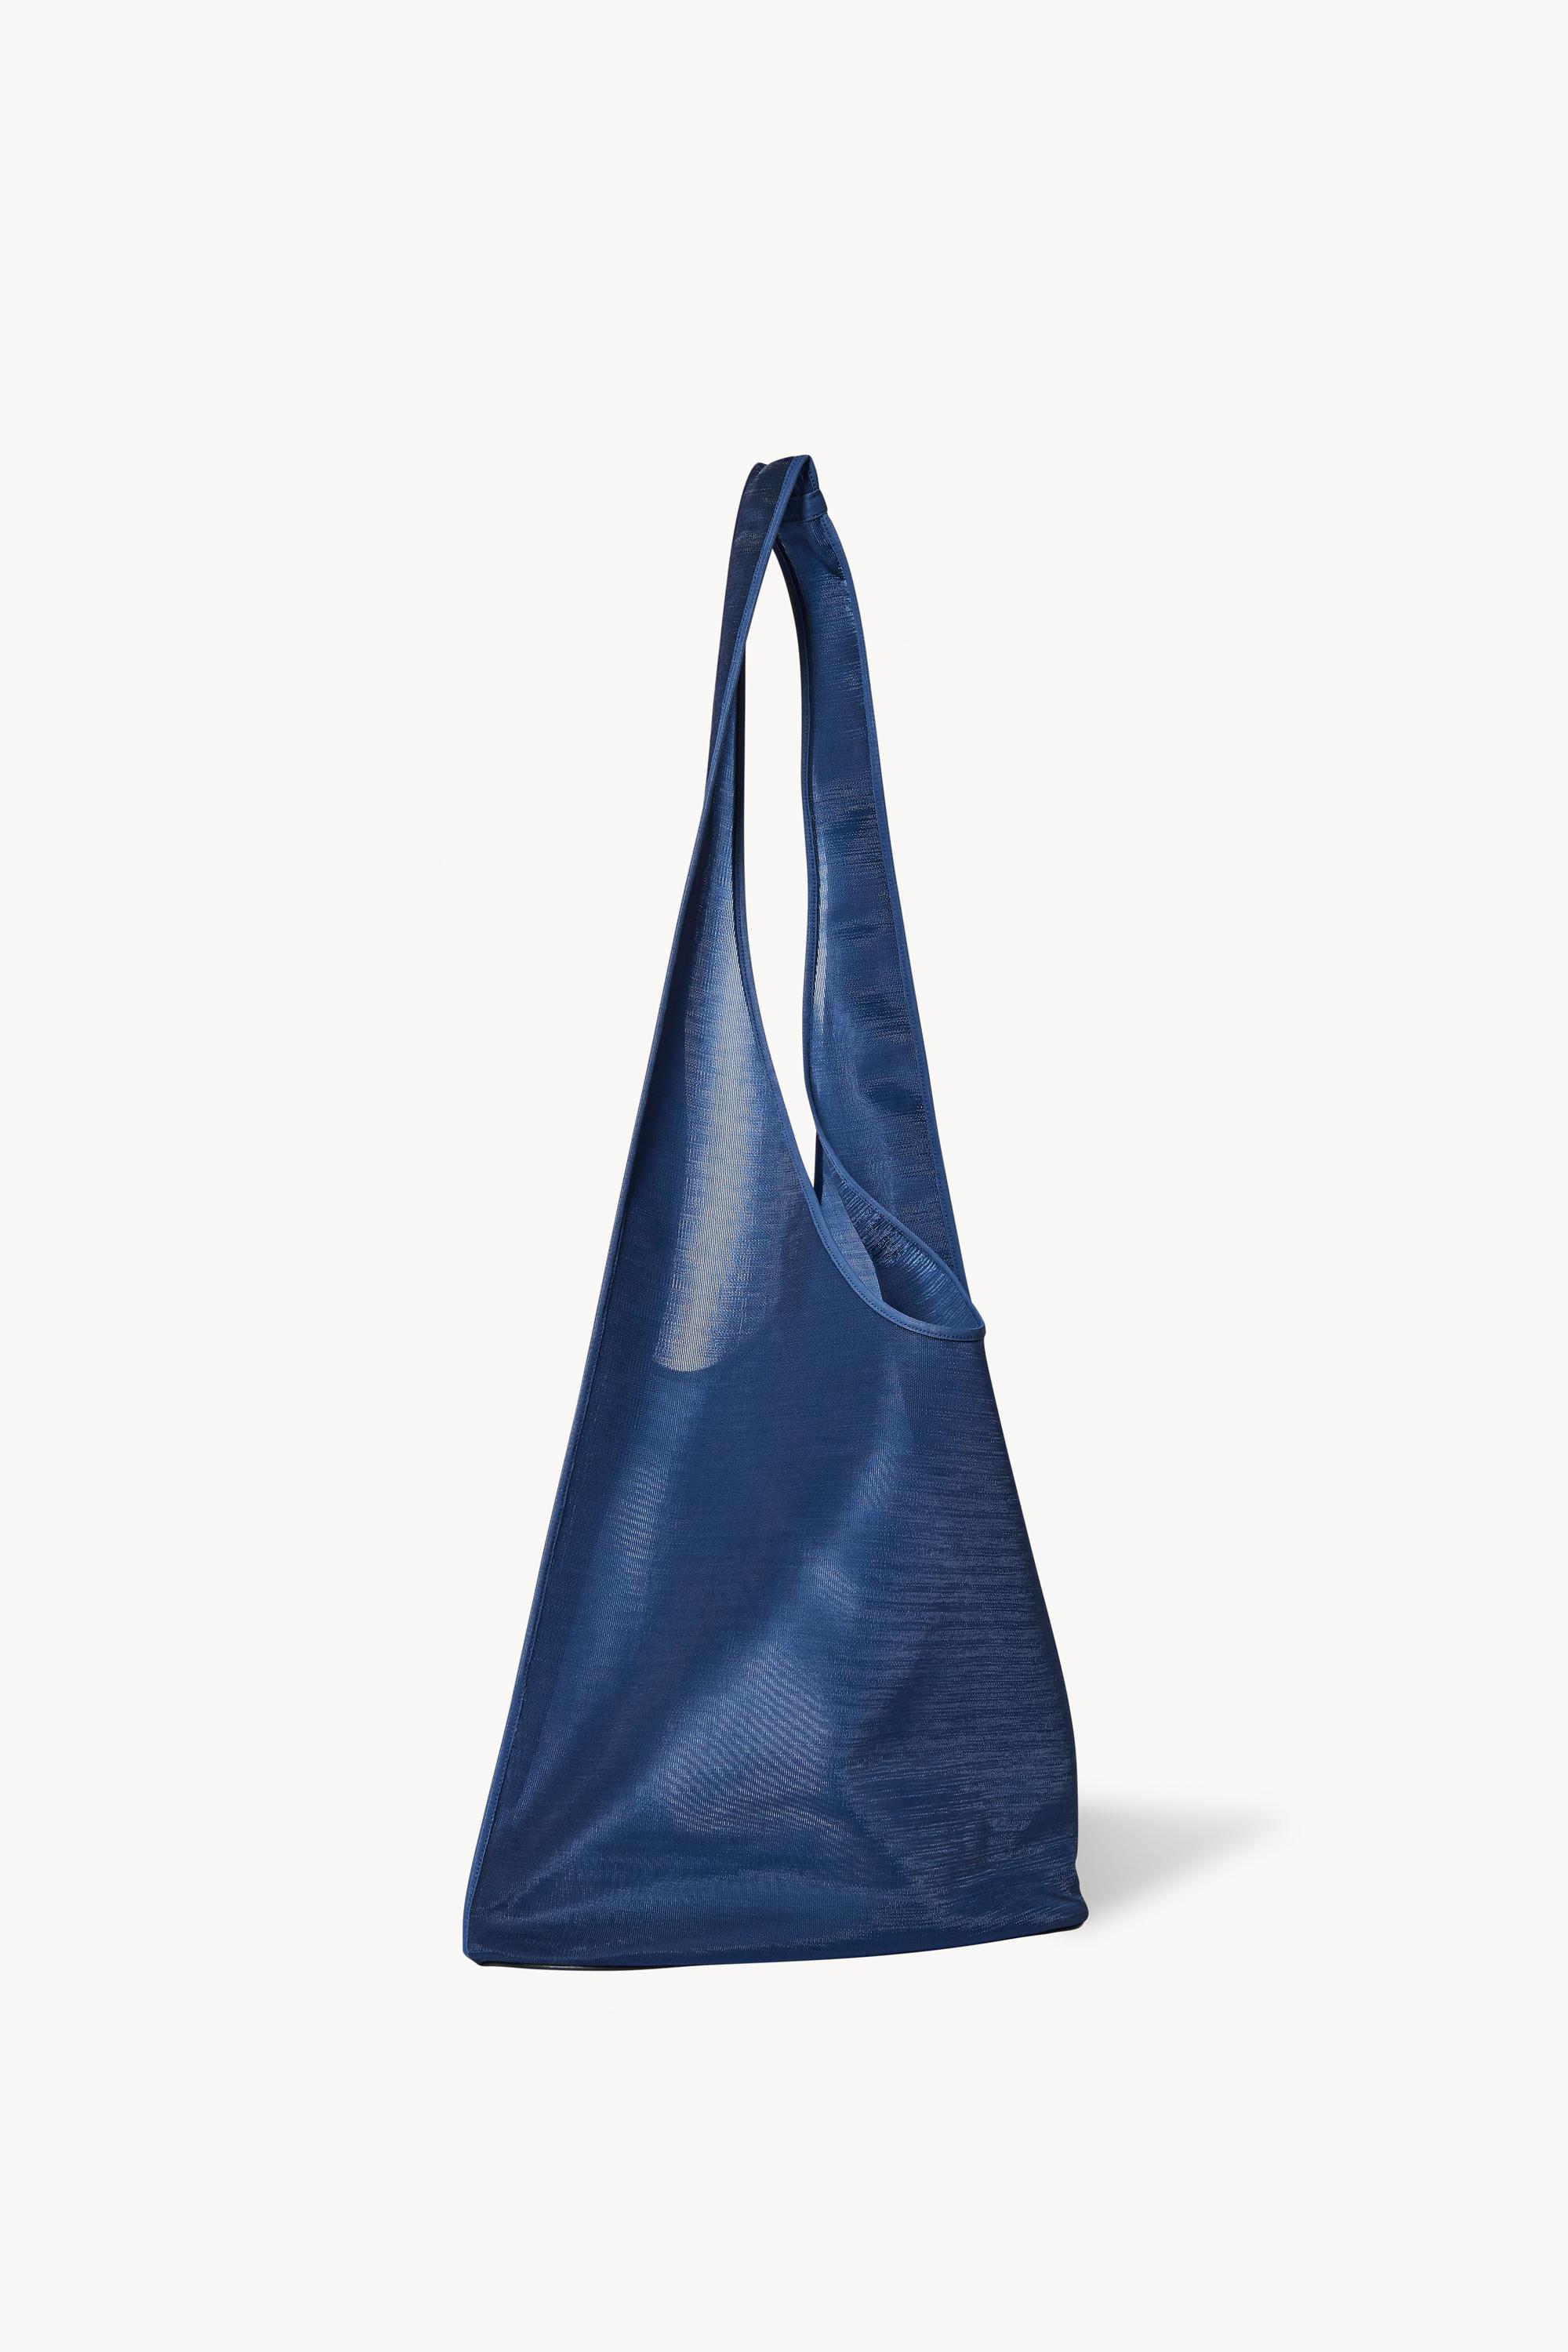 The Row Synthetic Small Bindle In Nylon Mesh in Navy (Blue) - Lyst